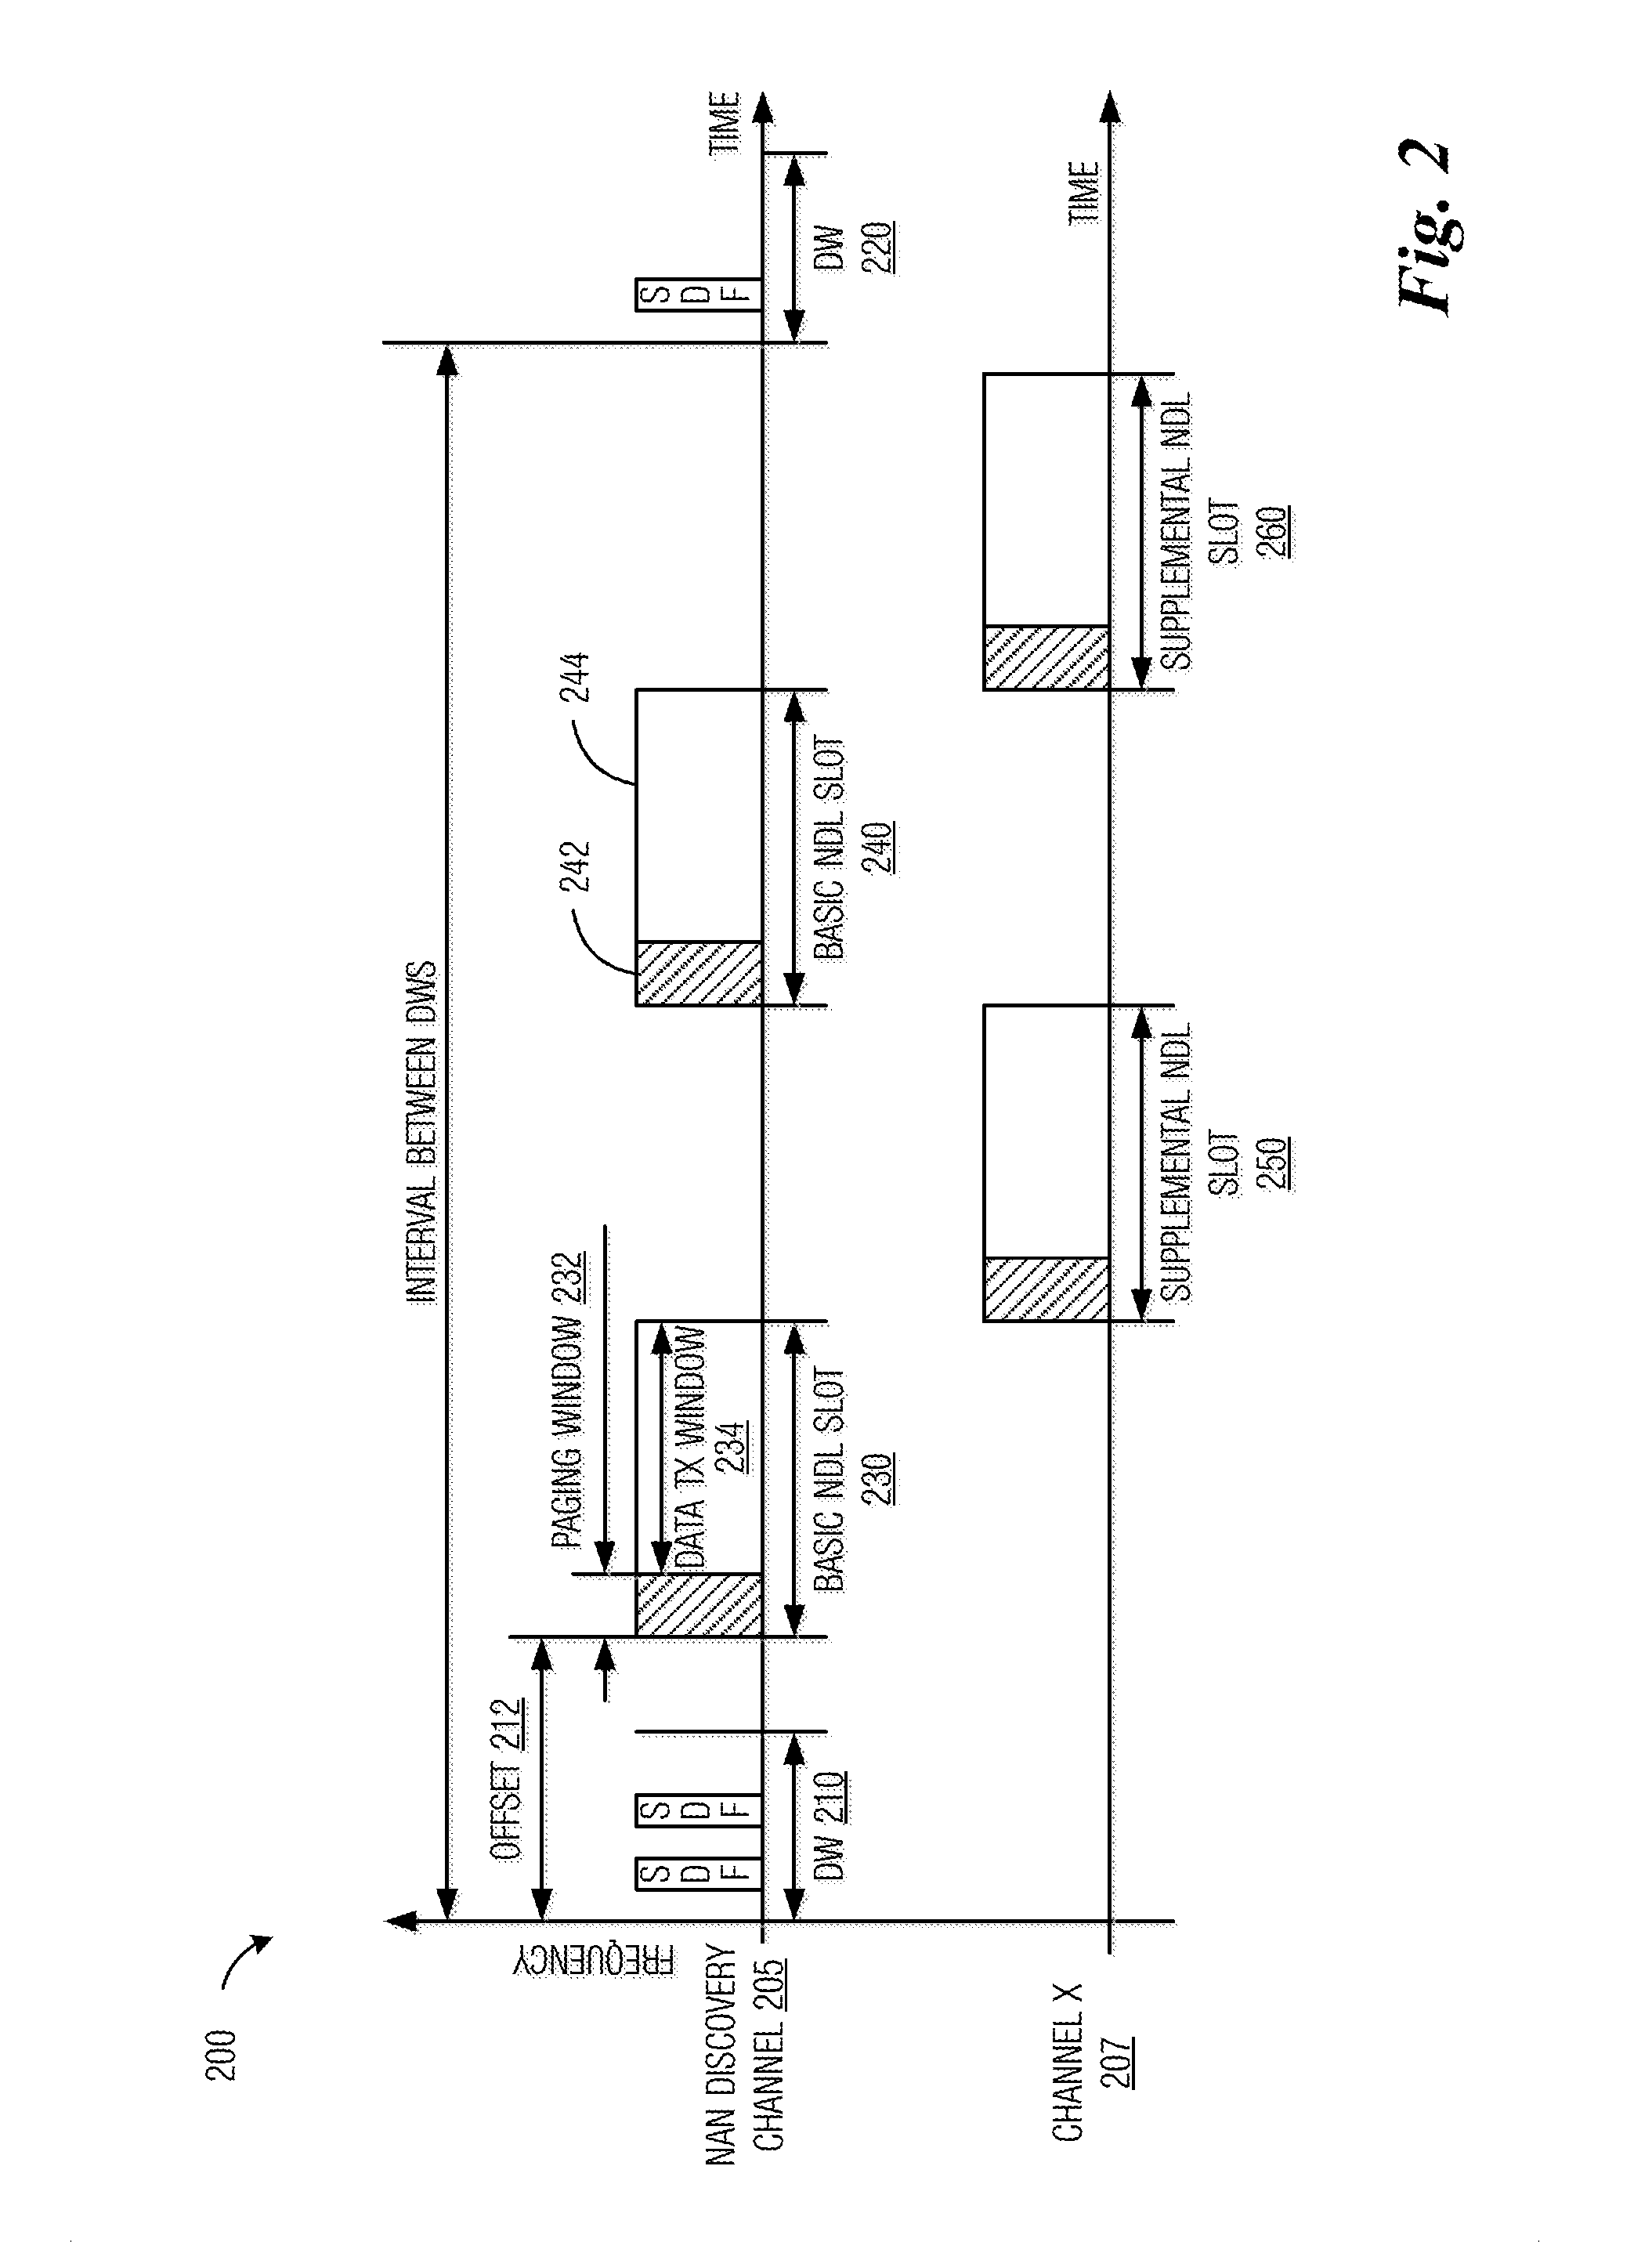 Method and System for Transmitting Data among Peer Stations in a Decentralized Manner with High Channel Efficiency